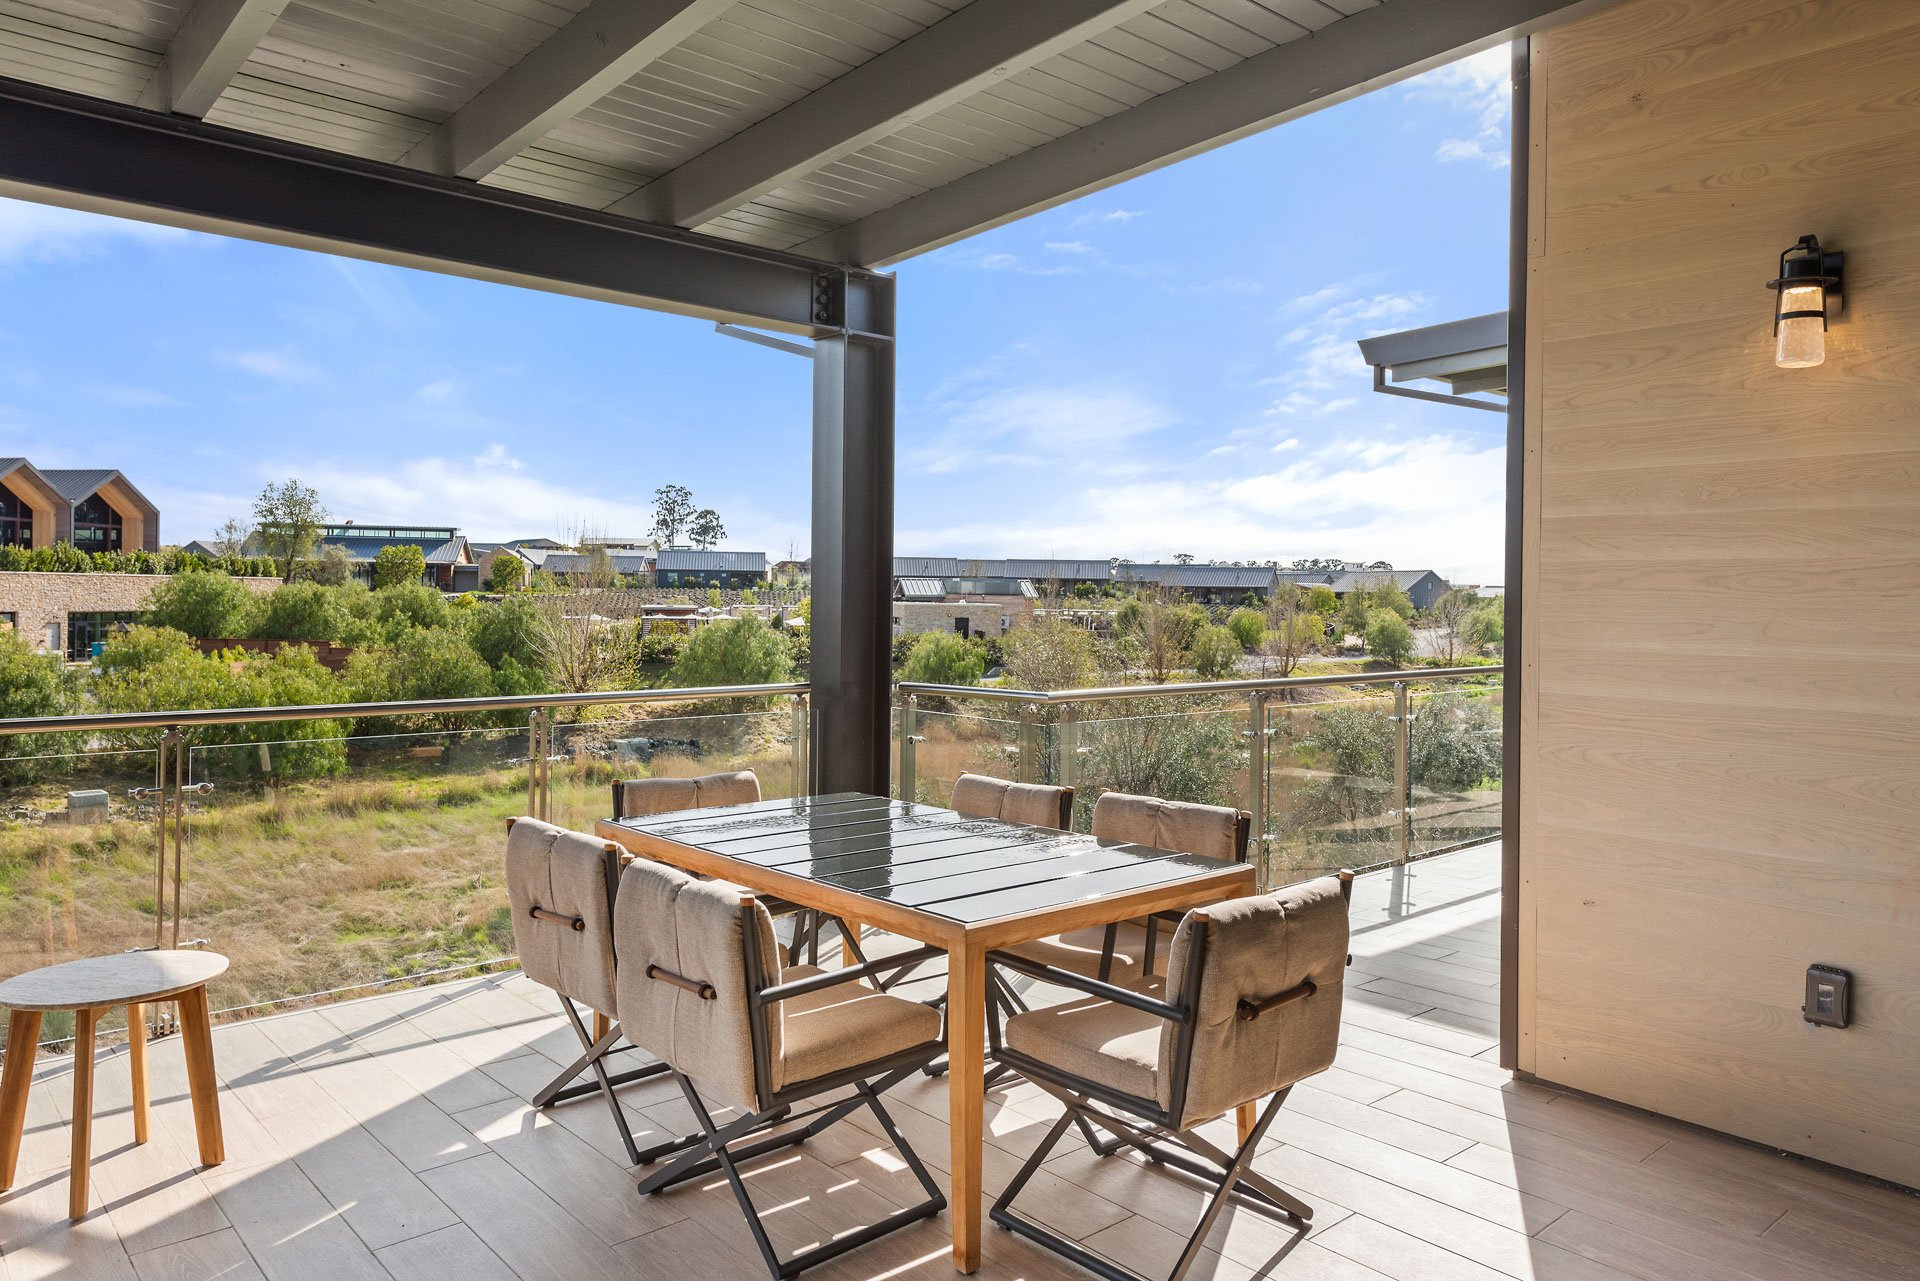 08-Stanly-Ranch-Sky-Villa_Napa-Luxury-Home_For-Sale.jpg